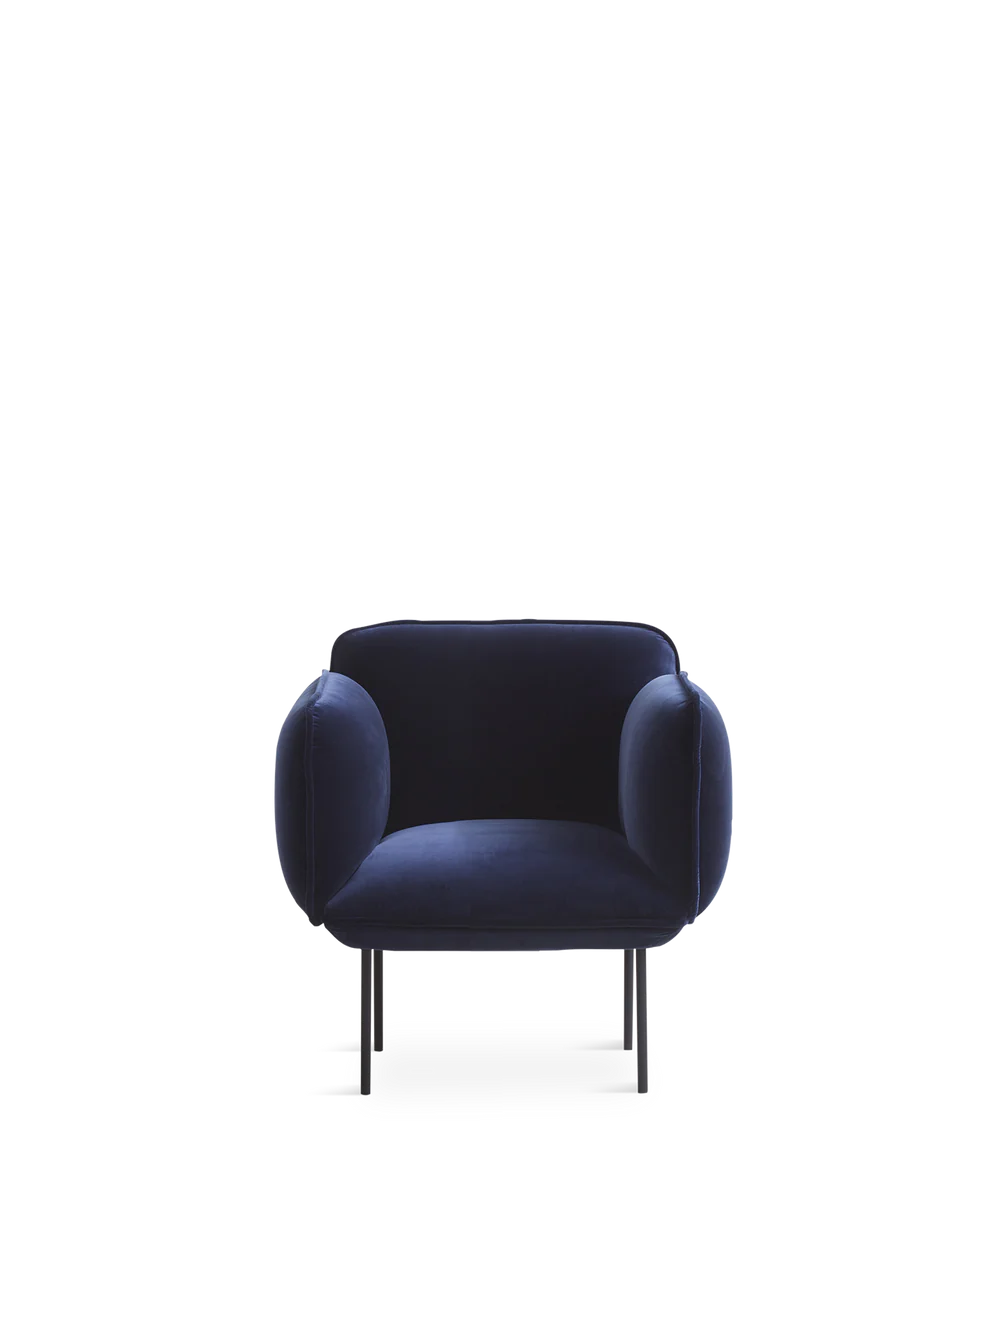 Nakki Small armchair in many colors and fabrics